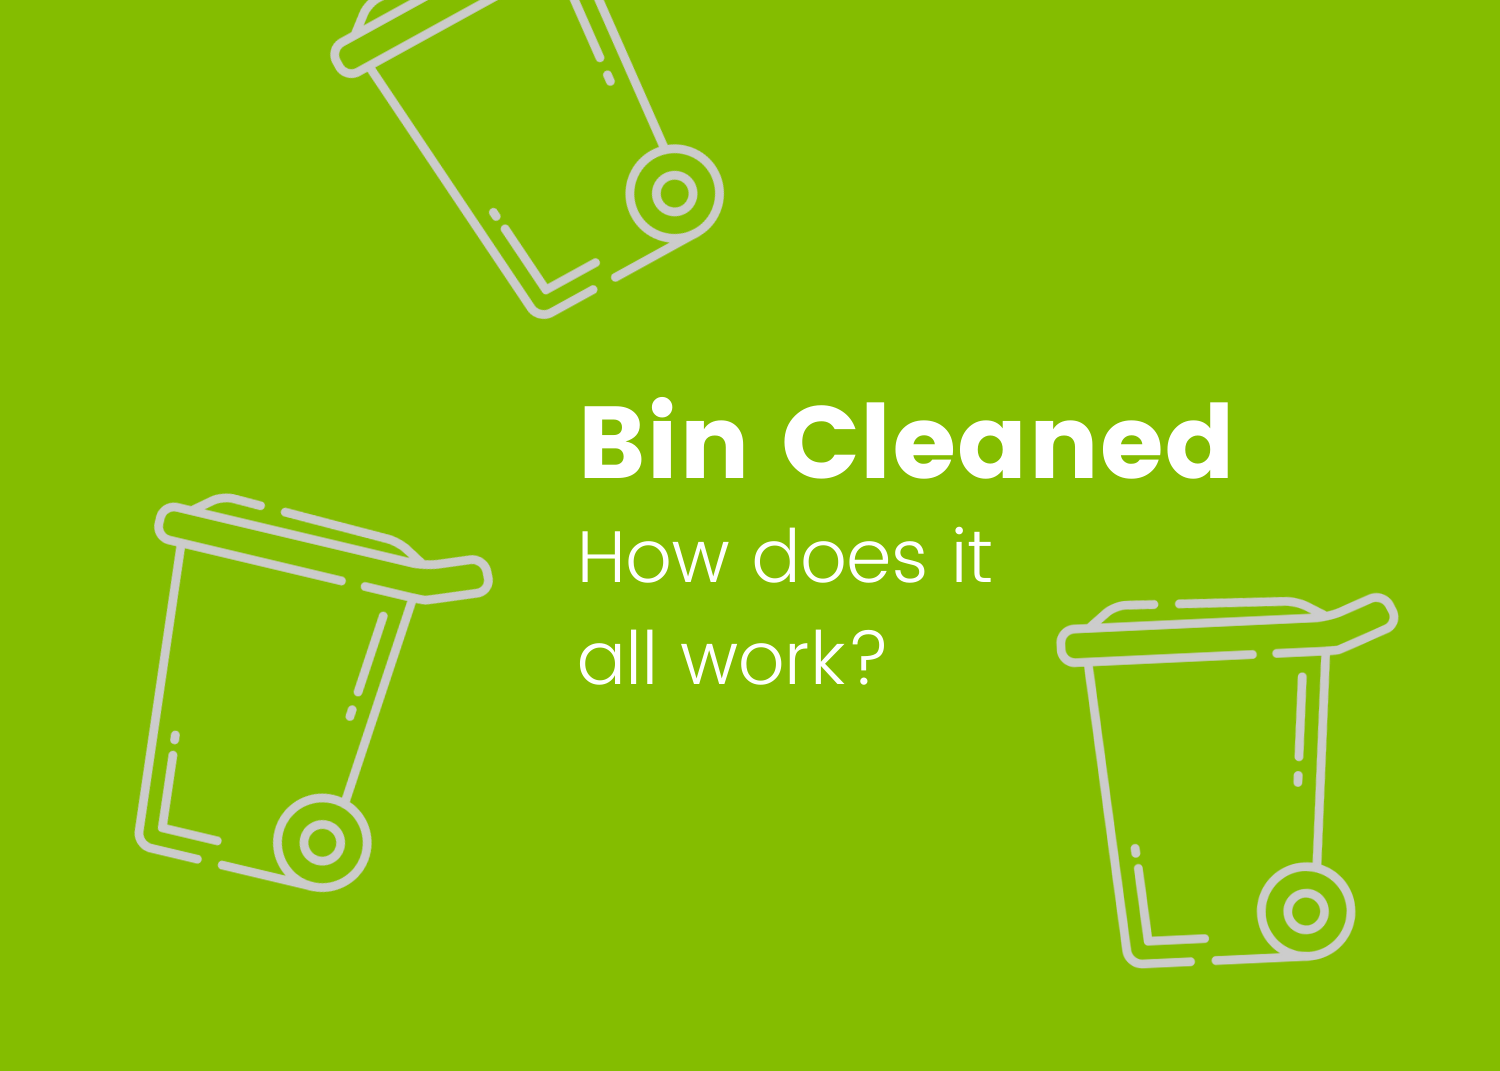 Bin Cleaned - How does it all work